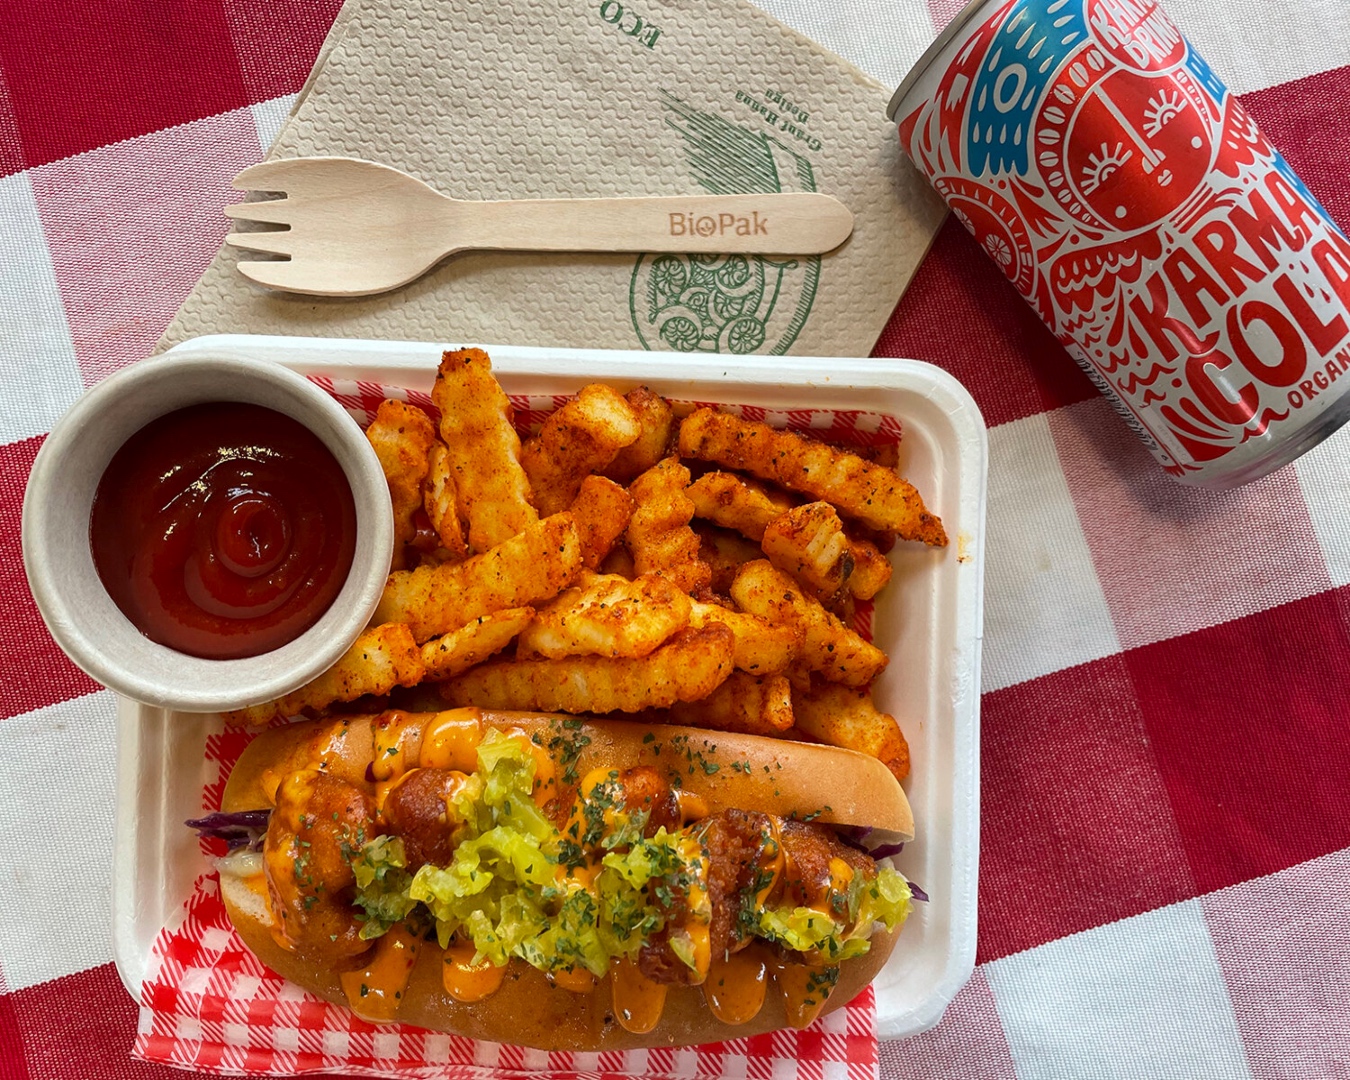 A container of seasoned crinkle-cut fries next to a sub roll of fried cauliflower topped with pickles and herbs, a pot of tomato sauce and a can of Karma Cola